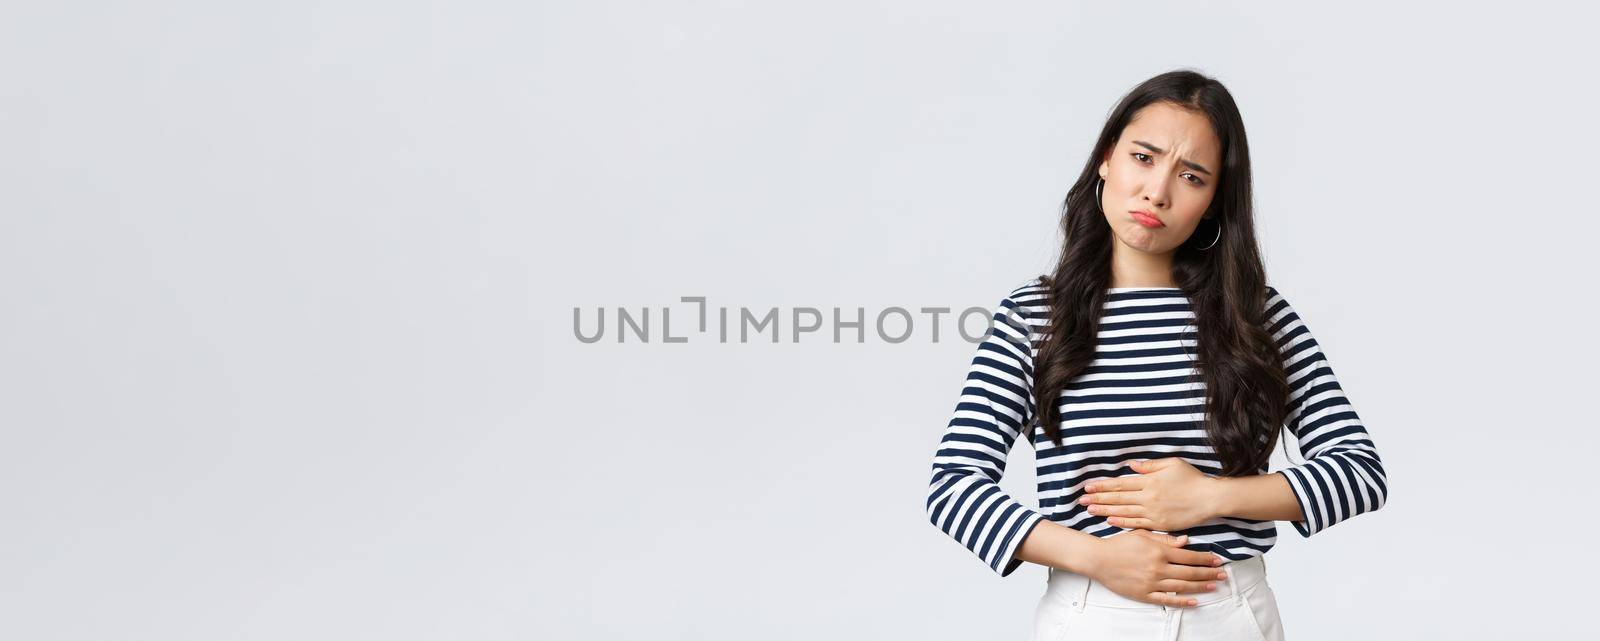 Lifestyle, beauty and fashion, people emotions concept. Woman got food poisoned, touching belly feeling unwell. Asian girl with cramps looking gloomy, having menstrual pain, white background.